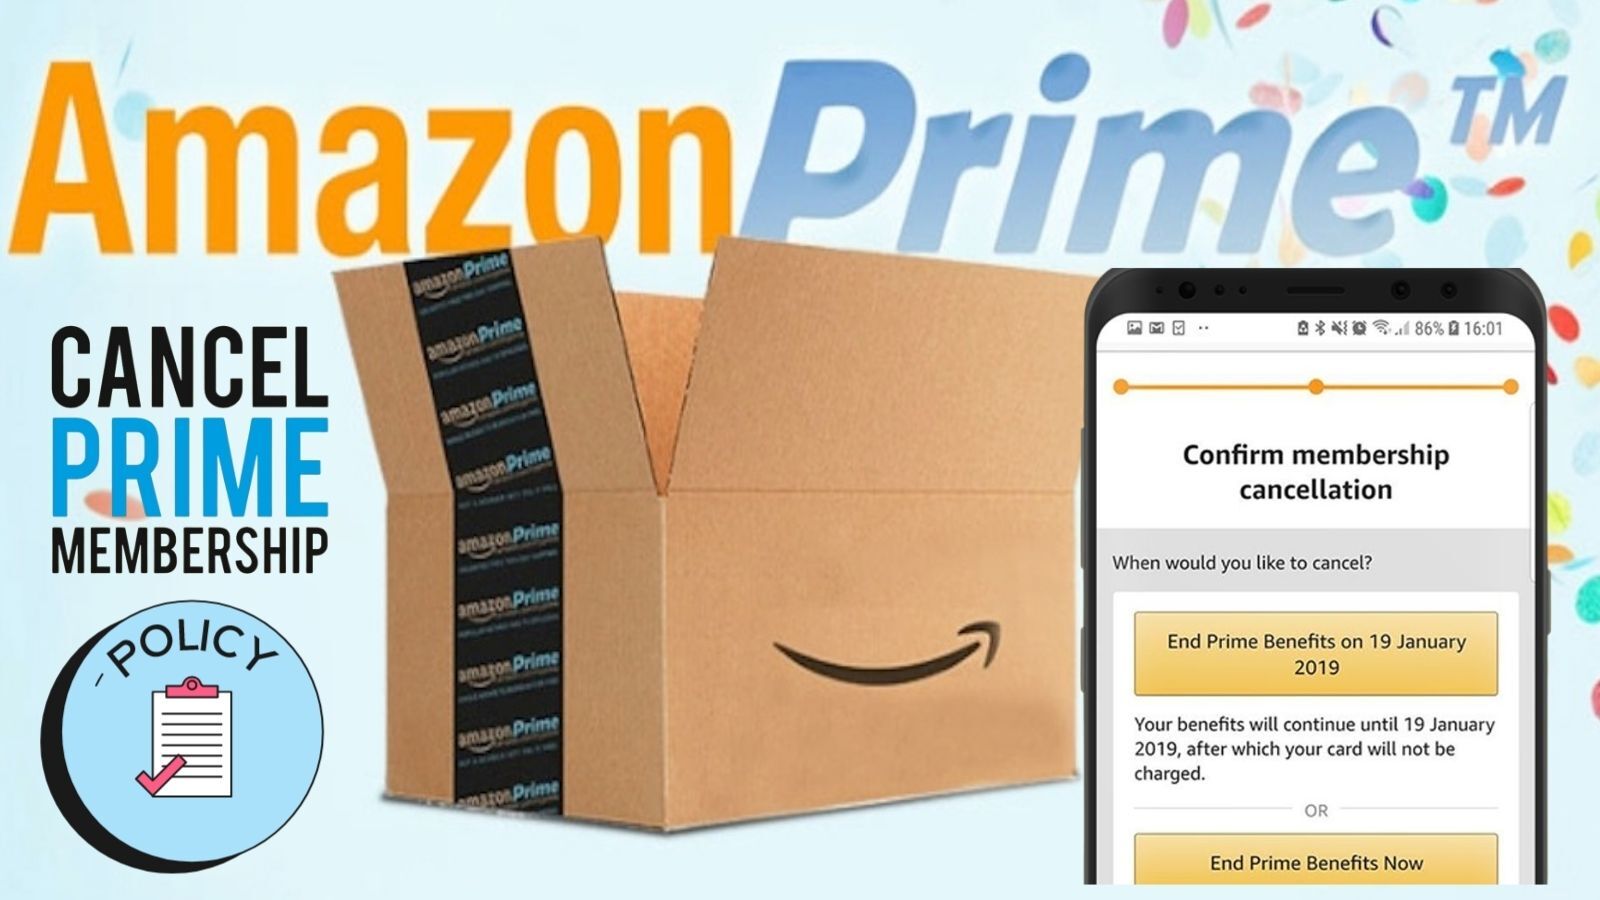 Amazon Prime Cancellation Policy (How to Do It?)